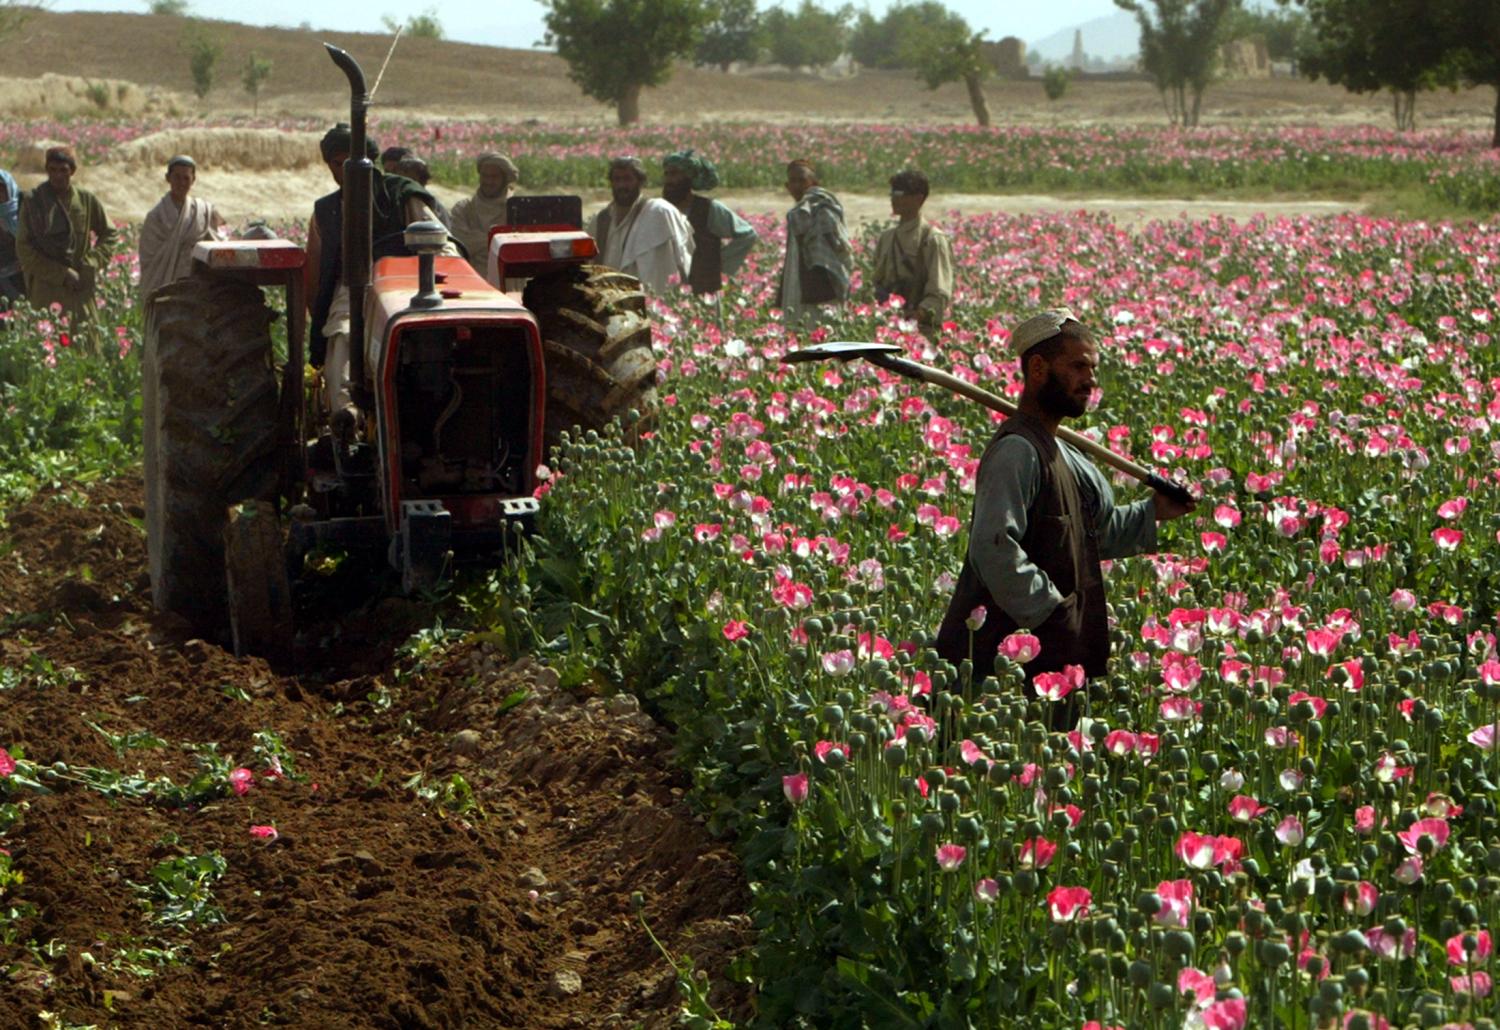 DATE IMPORTED:April 10, 2004AN OPIUM FARMER STARES OUT AT HIS CROP AS OFFICIALS ERADICATE THE POPPY FIELD USING TRACTORS IN KANDAHAR. Masoom Aga (R), an opium farmer, stares out at his crop as officials eradicate his poppy field using tractors near the southern Afghan city of Kandahar April 10, 2004. Afghan President Hamid Karzai recently called for a holy war against drugs in Afghanistan, said to be responsible for more than 75 per cent of the world's heroin. REUTERS/Adrees Latif